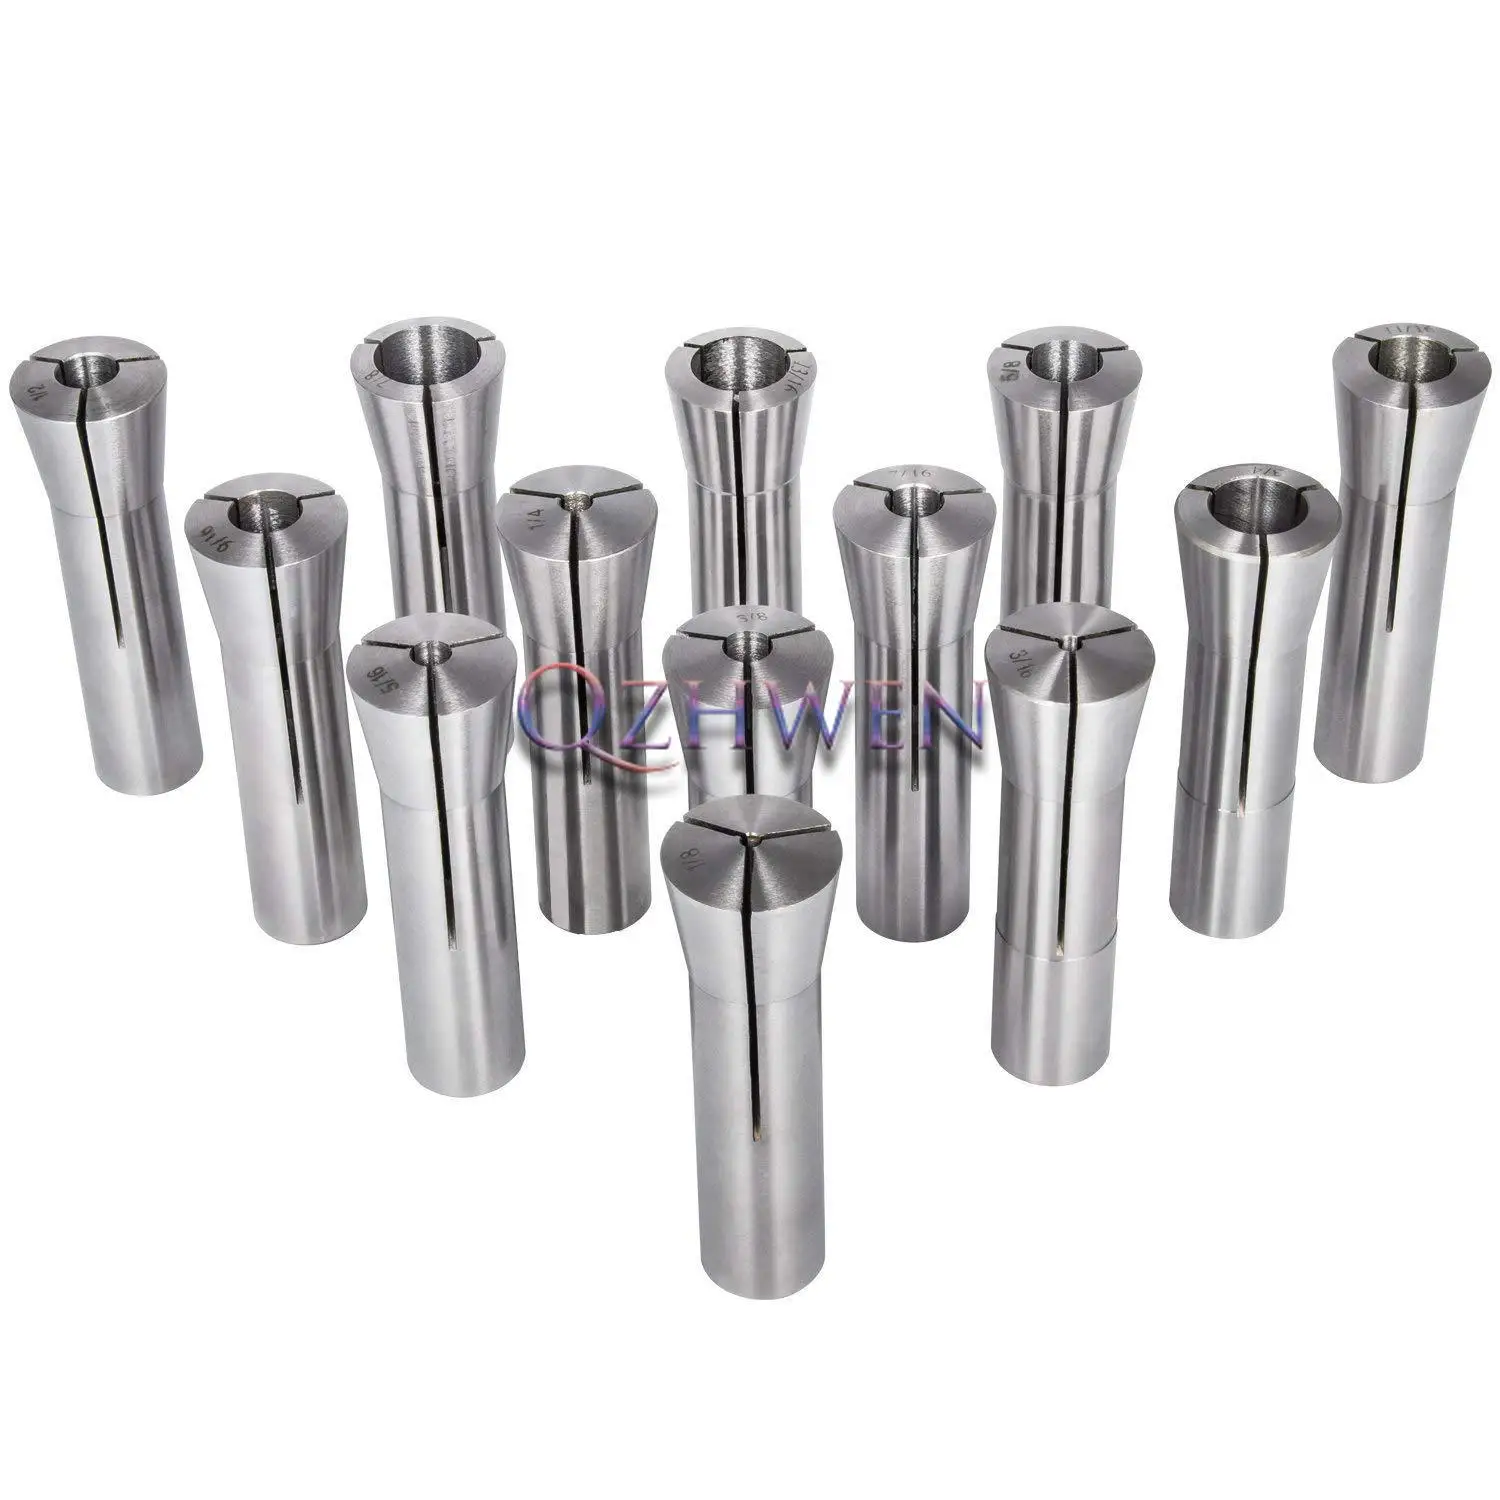 

13 Pieces High Precision Mill Chuck Holder R8 M12 5MM Diameter Cable Chuck Milling Cutter Chuck